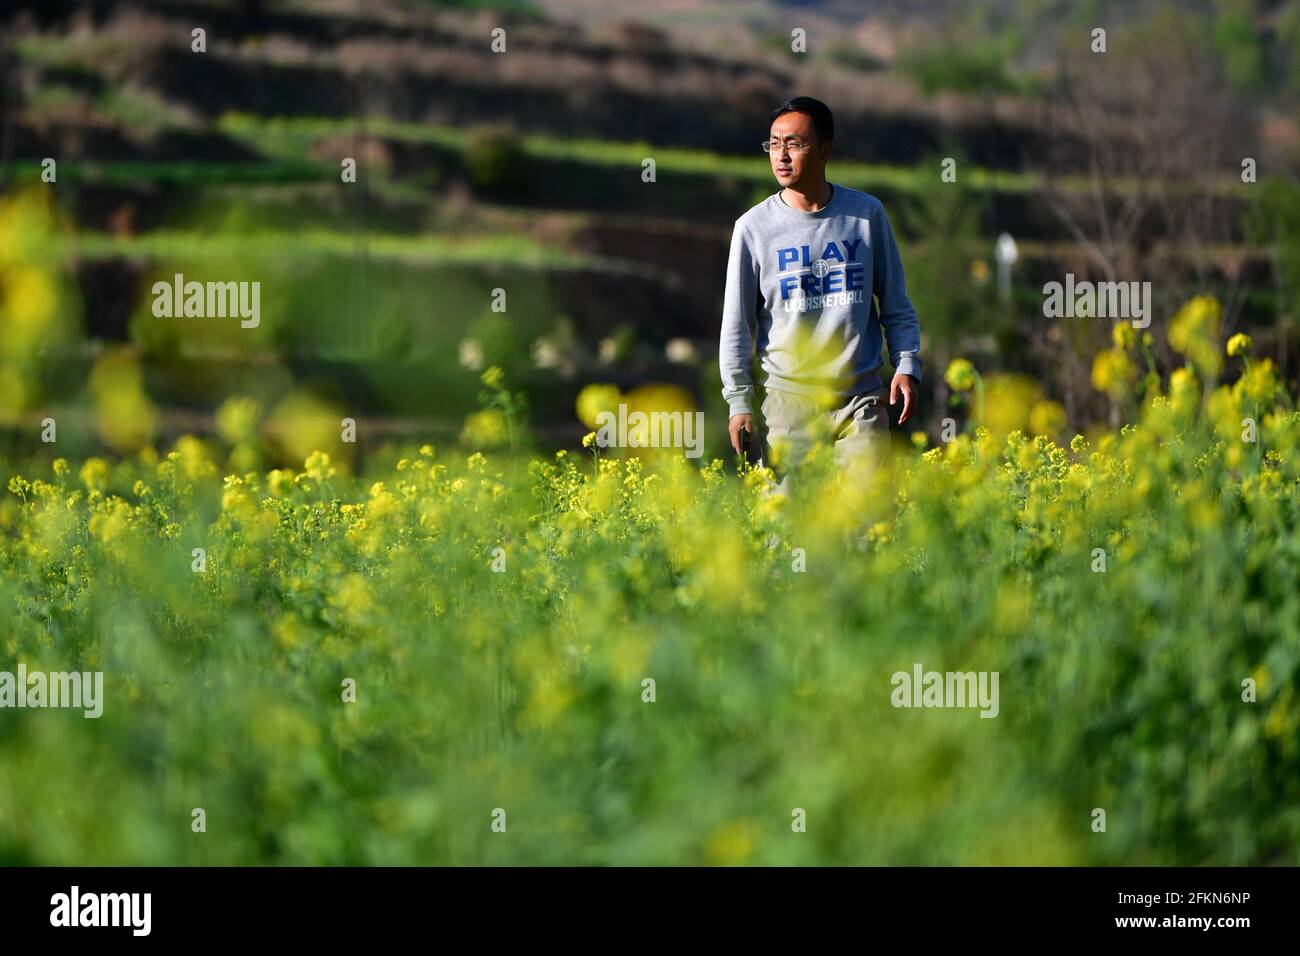 (210503) -- TIANSHUI, May 3, 2021 (Xinhua) -- Zhang Shuhao walks past a cole flower field in Mudan Township, Tianshui City of northwest China's Gansu Province, on April 28, 2021. Zhang Shuhao, 42, quit his well-paid job three years ago to start an agriculture company with a few partners sharing the same vision at a mountainous village in Mudan Township, Tianshui City. In three years, Xinghuarong, Zhang's company, contracted 6,200 mu (about 413 hectares) of idle arable lands, where terraced fields, greenhouses, and a reservoir have been built to grow diverse produces ranging from traditional C Stock Photo